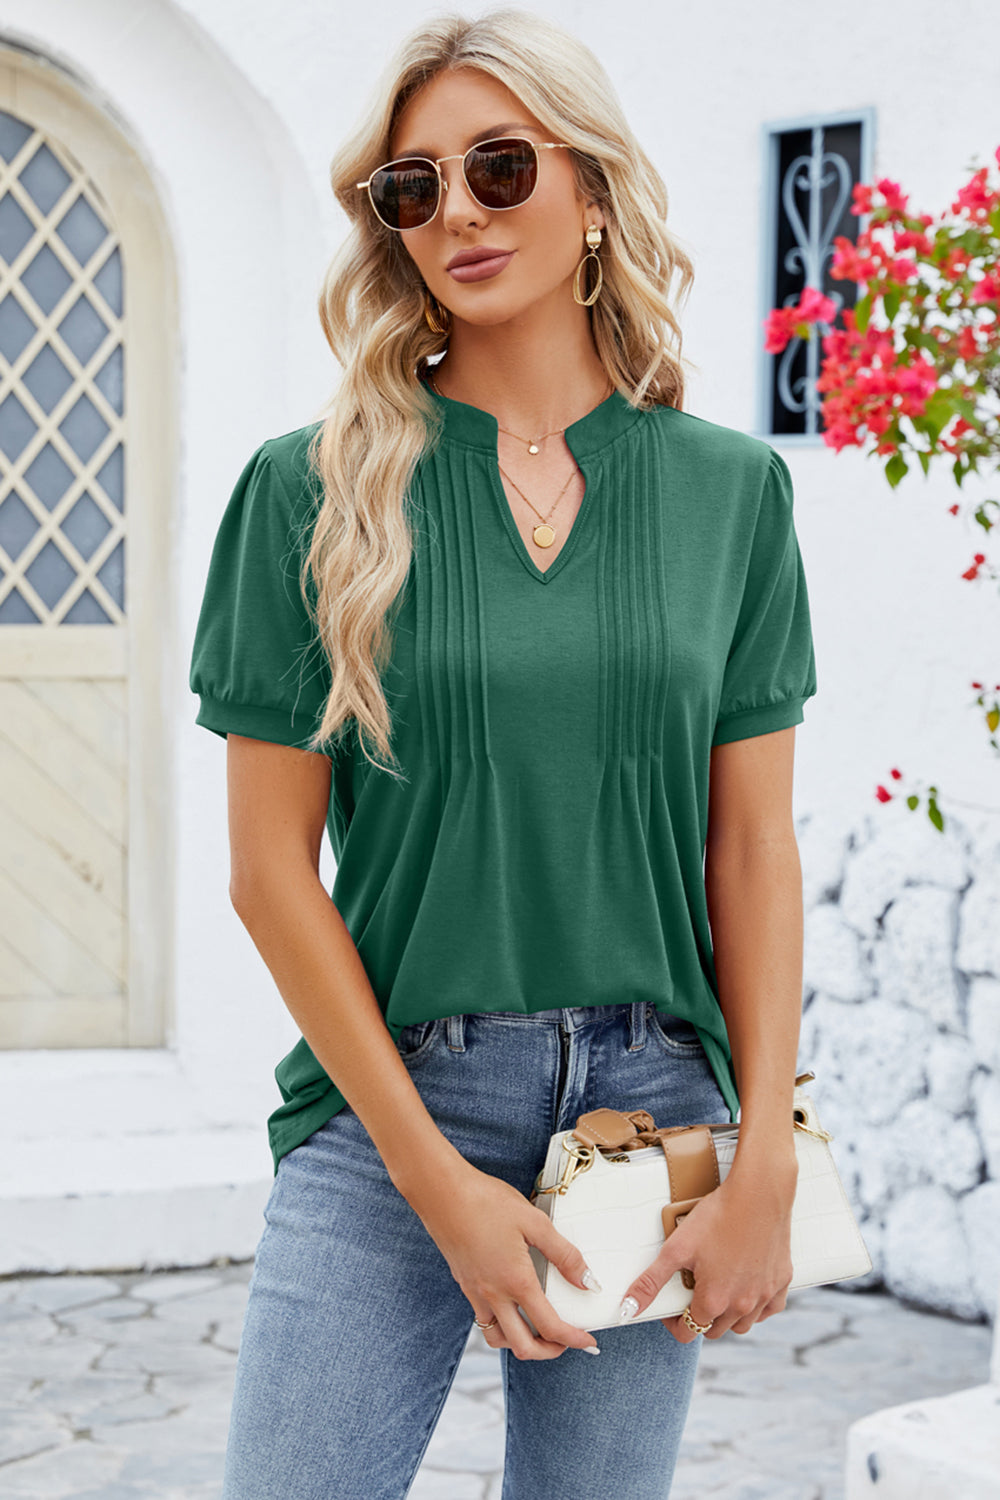 Chic notched neckline T-shirt in 5 colors. Perfect blend of style & comfort for everyday elegance.